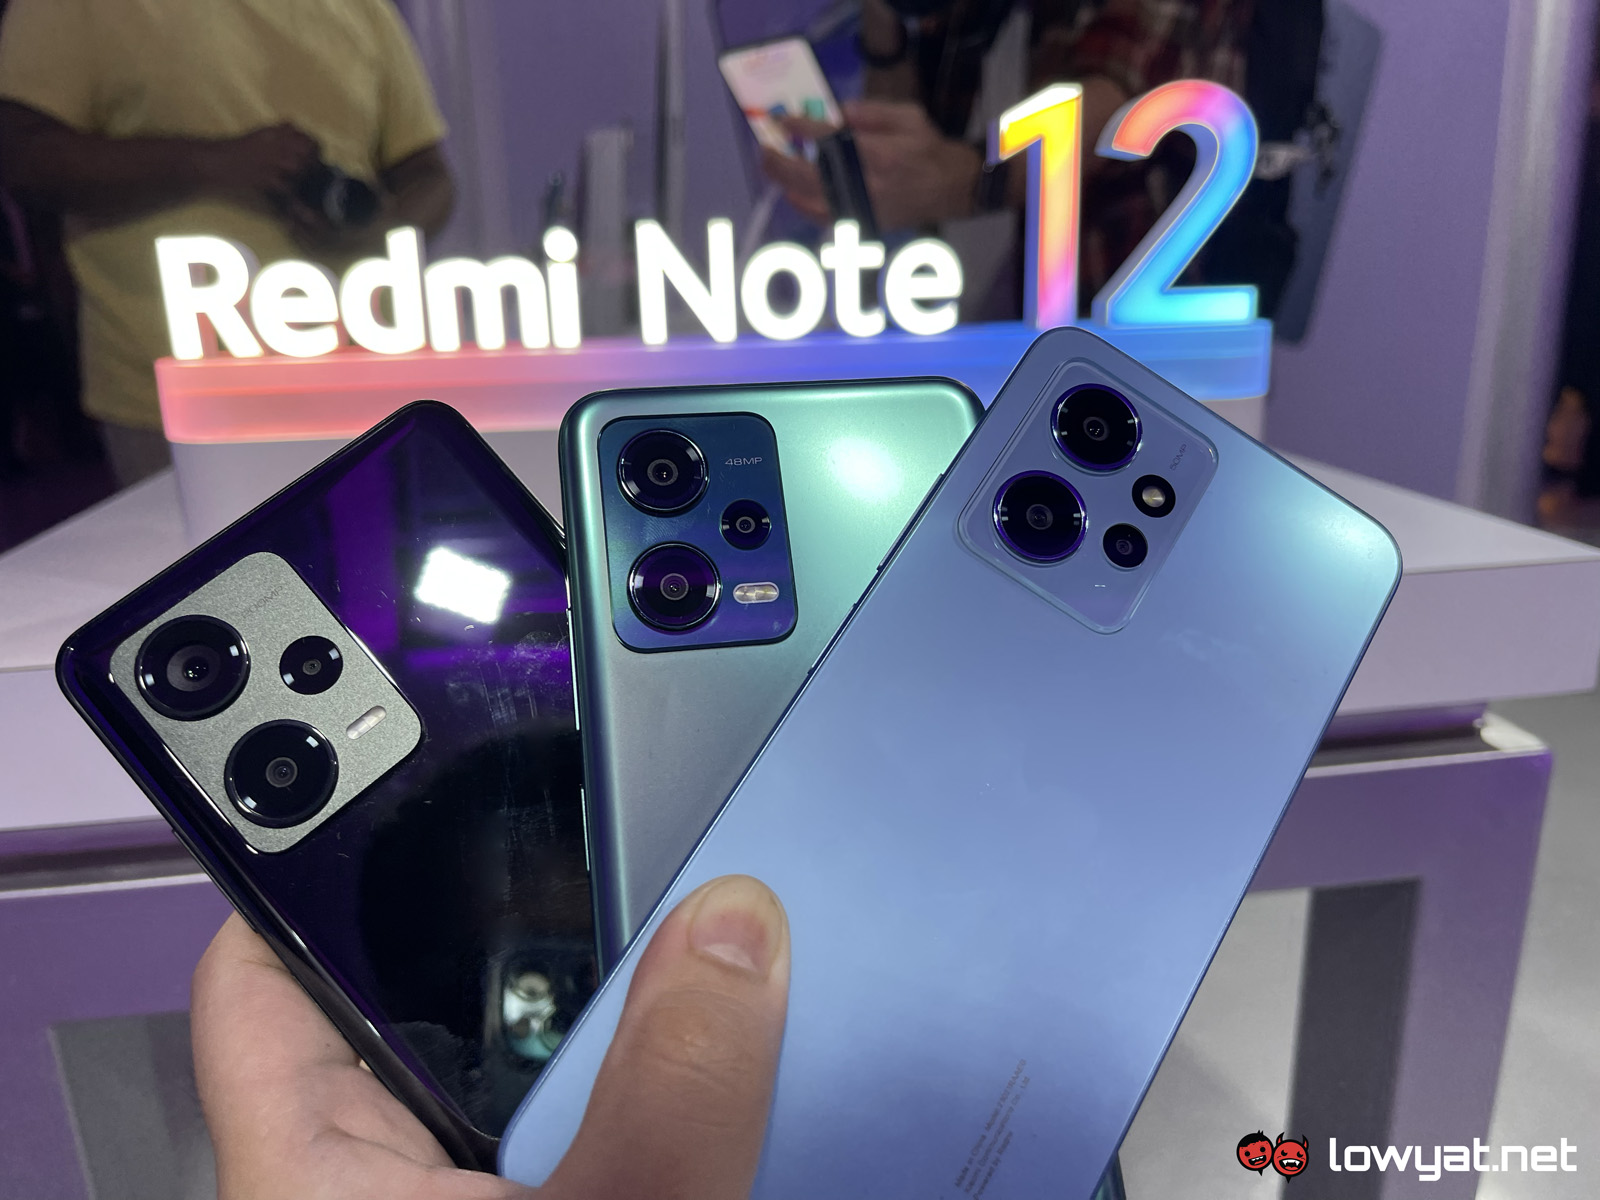 Redmi Note 12 Pro Plus debuts with 120W fast charging and 200MP